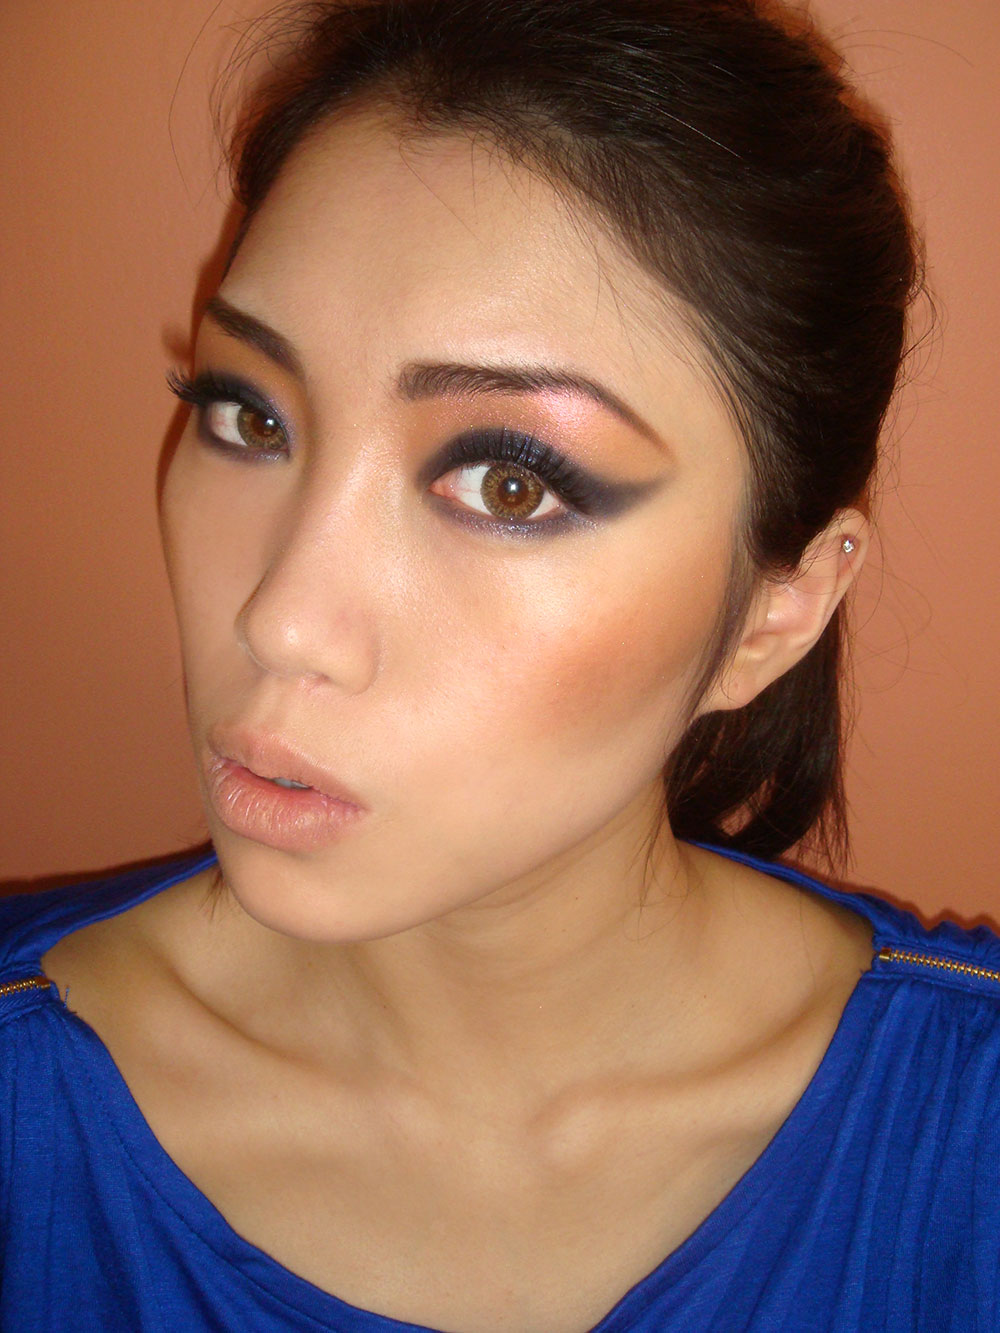 FOTD: ’80s Inspired Strong Cat Eye Makeup Look – Makeup For Life